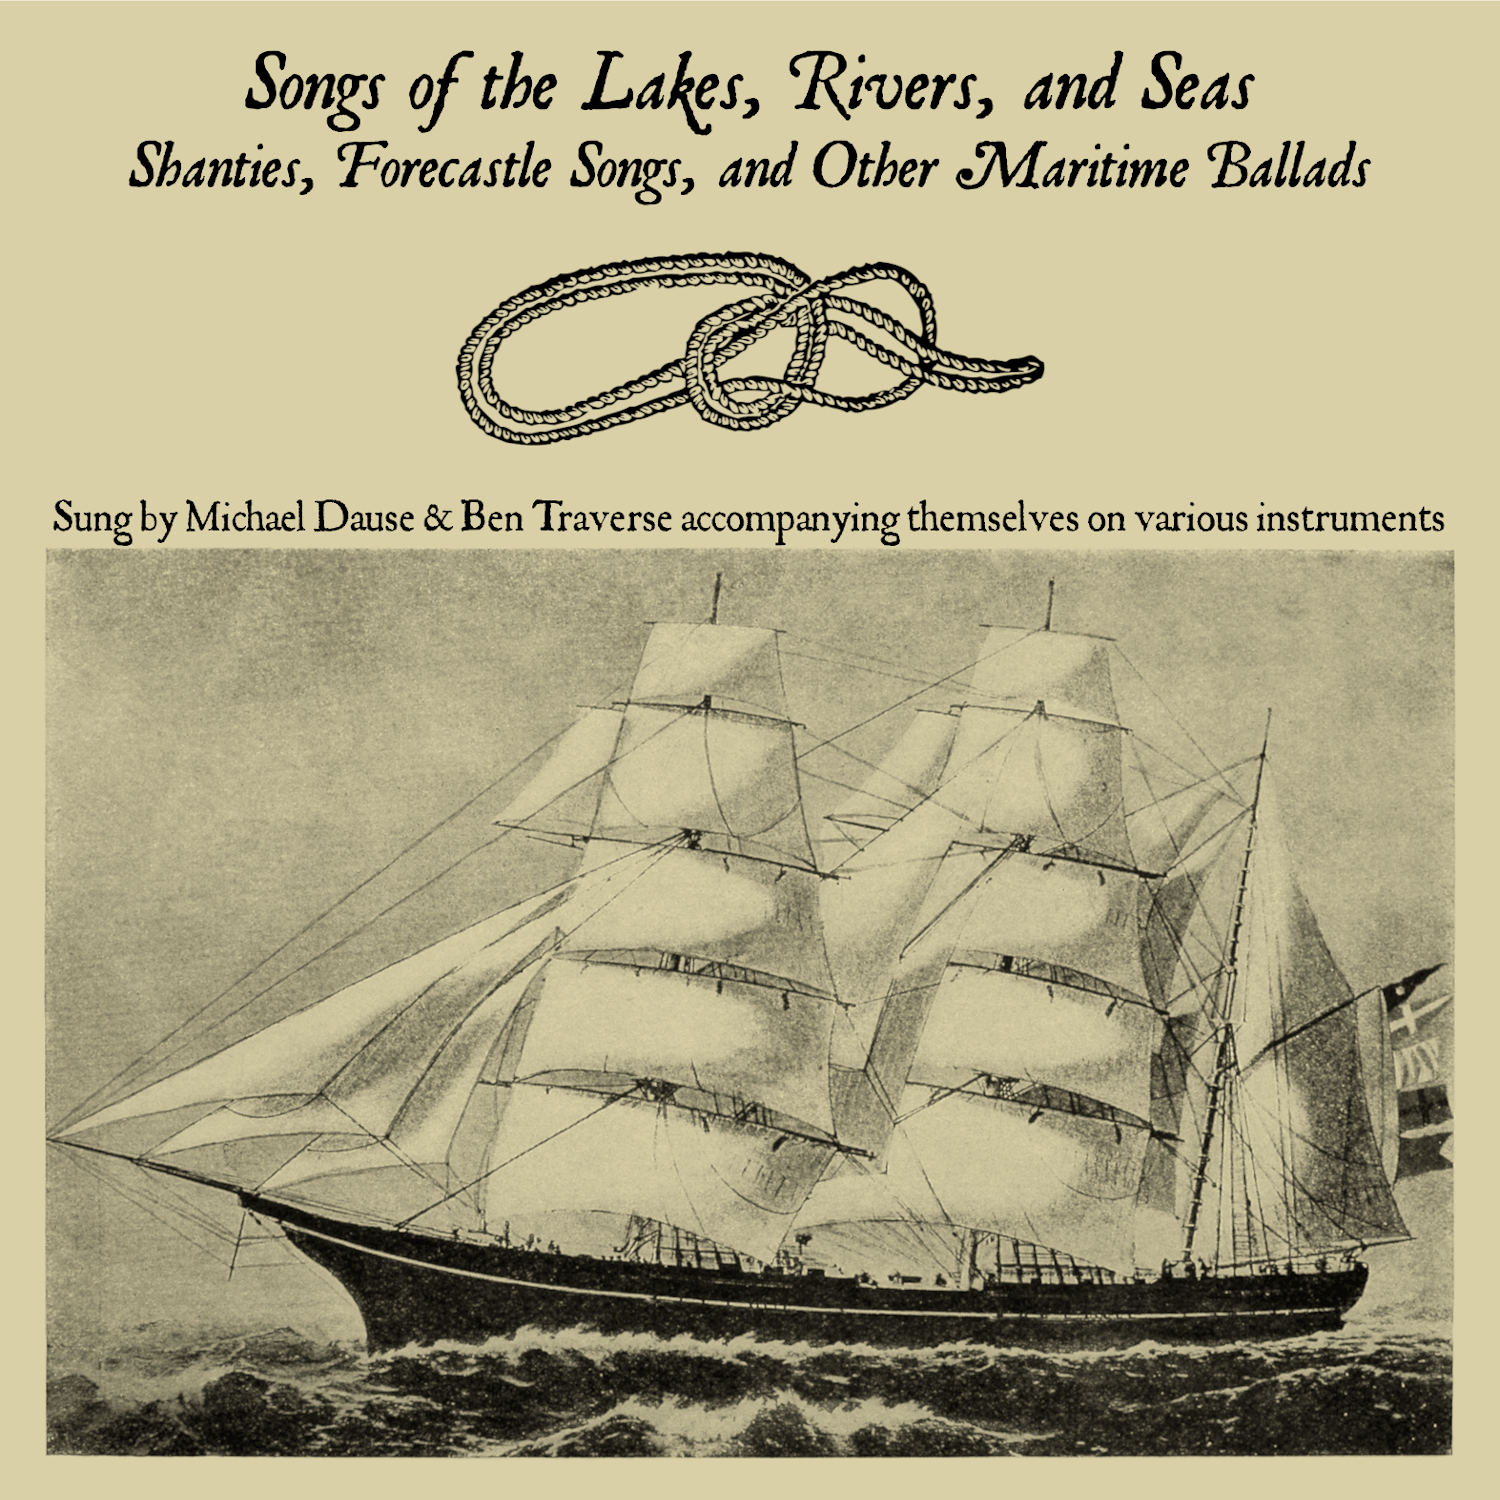 Album cover of Songs of the Lakes Rivers and Seas: Shanties, Forecastle Songs, and Other Maritime Ballads, a collaboration with Michael Dause